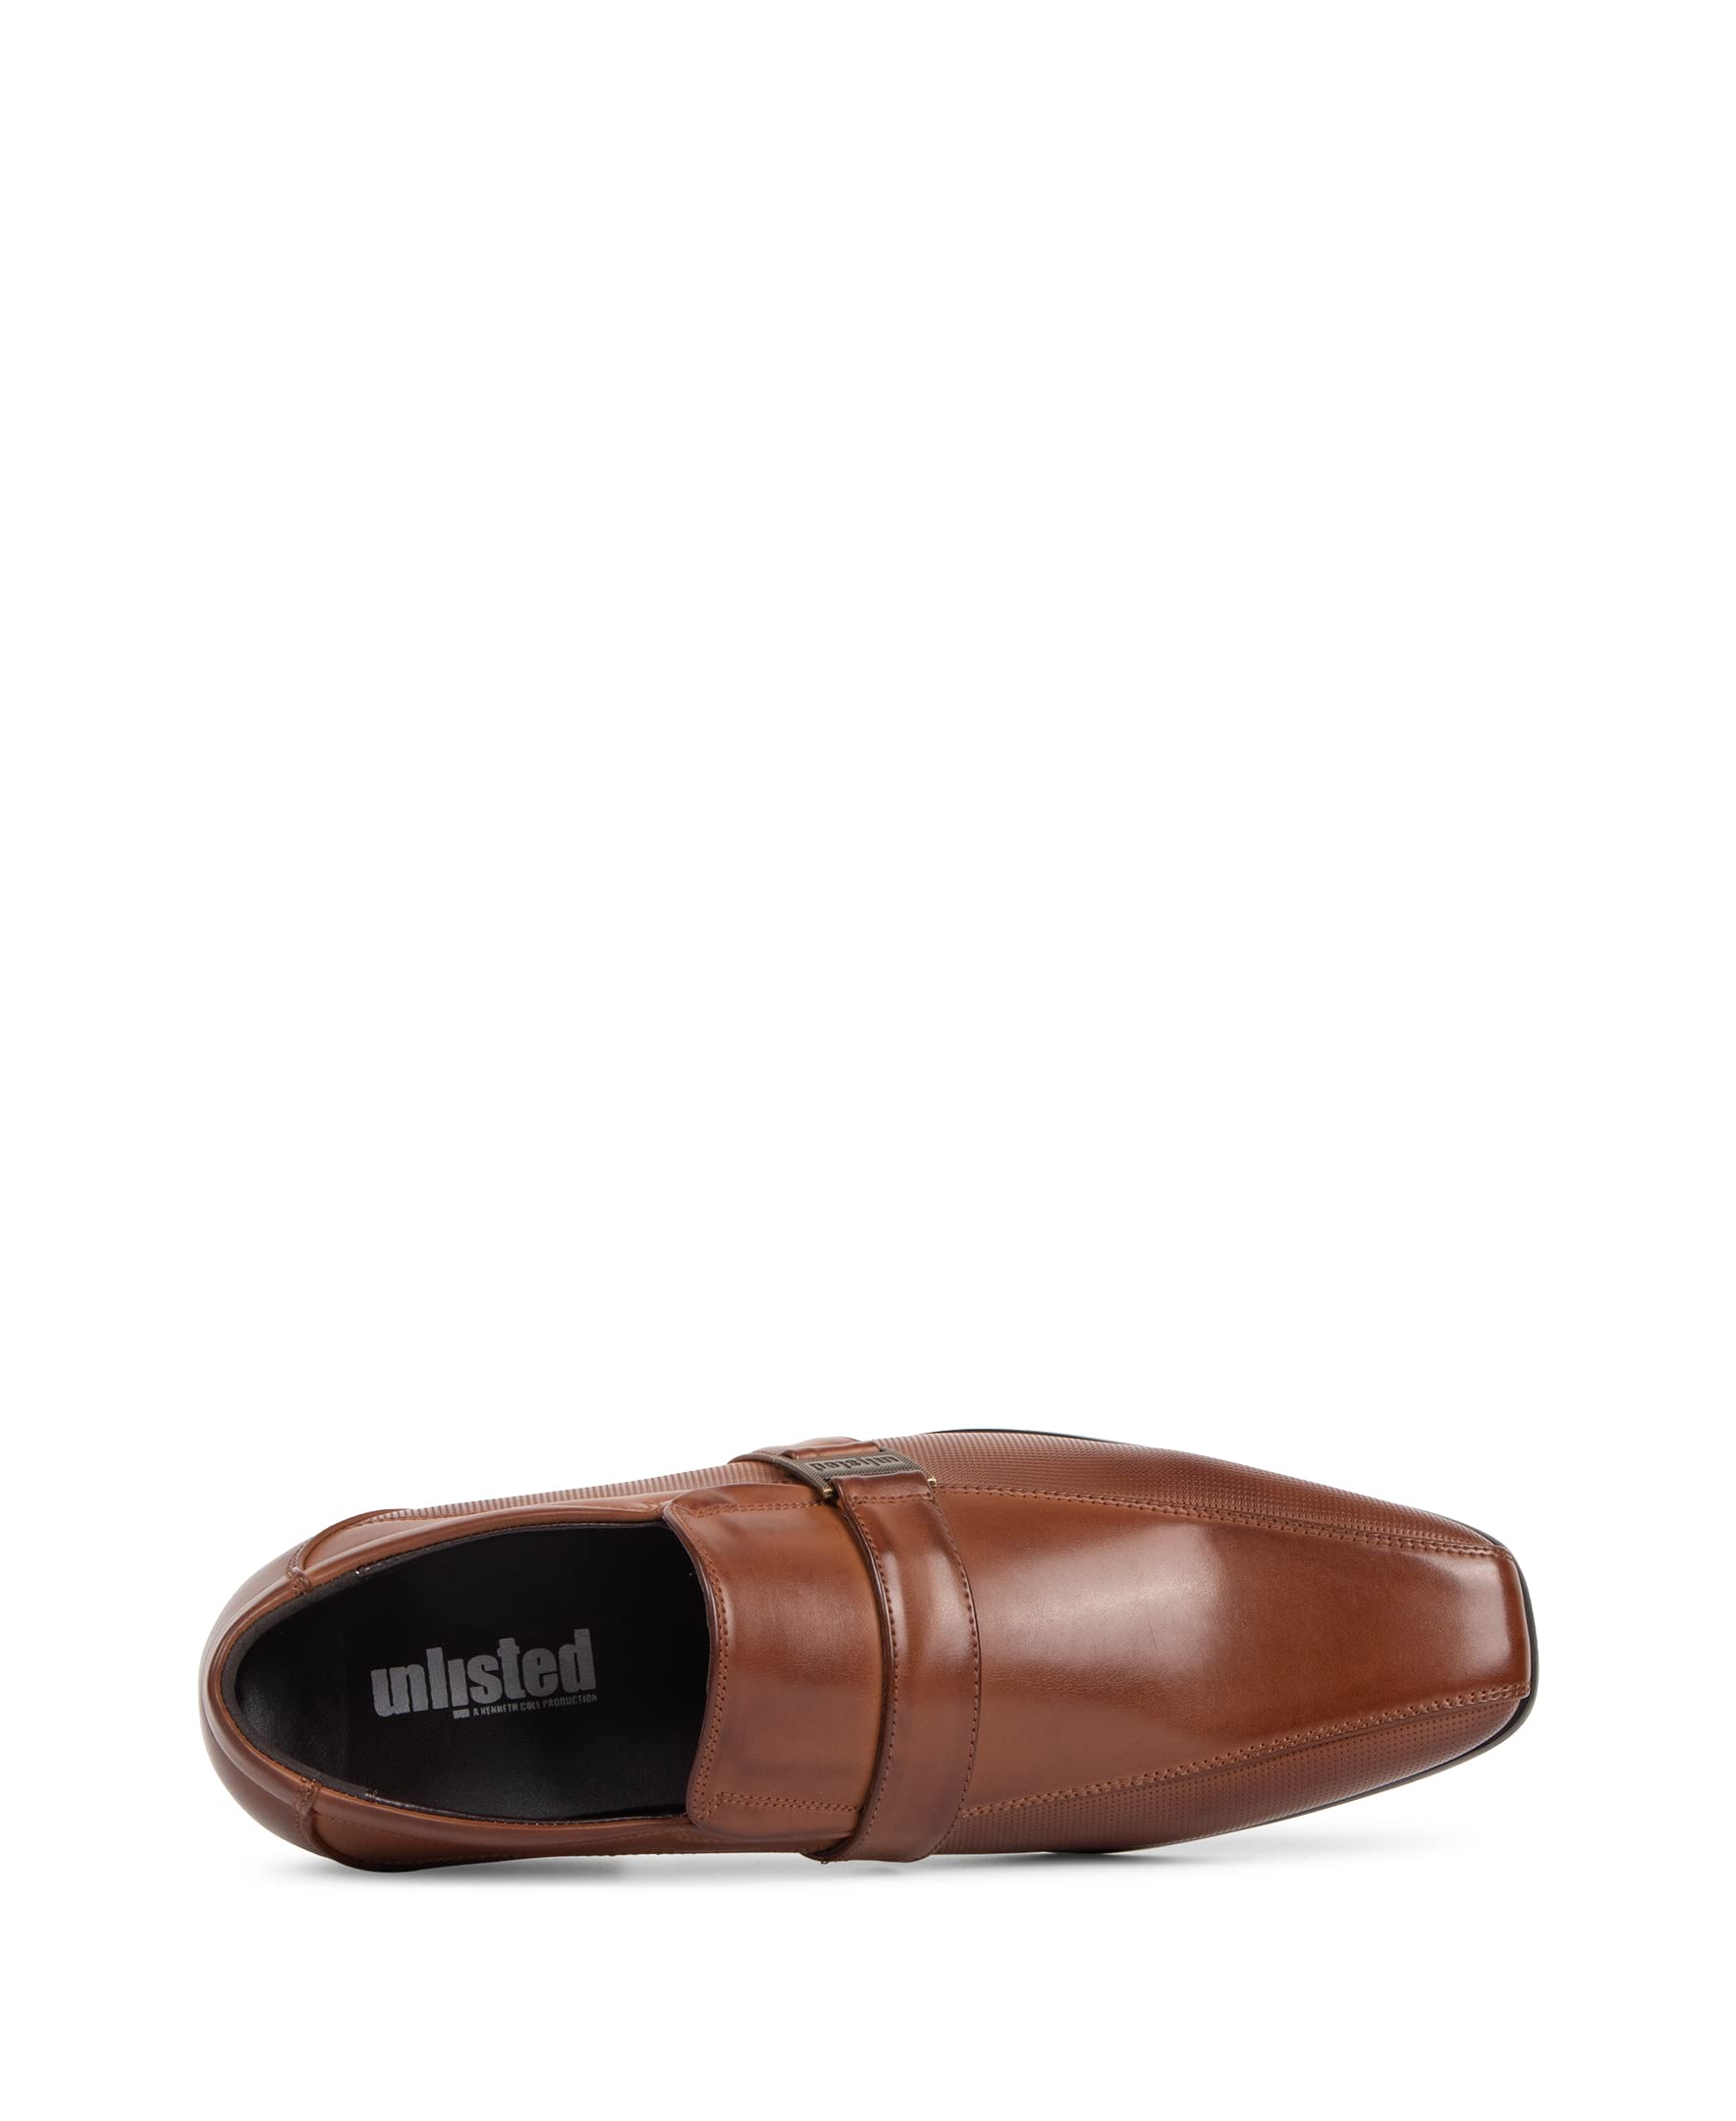 Kenneth Cole Unlisted Men's Beautiful Ballad Loafer